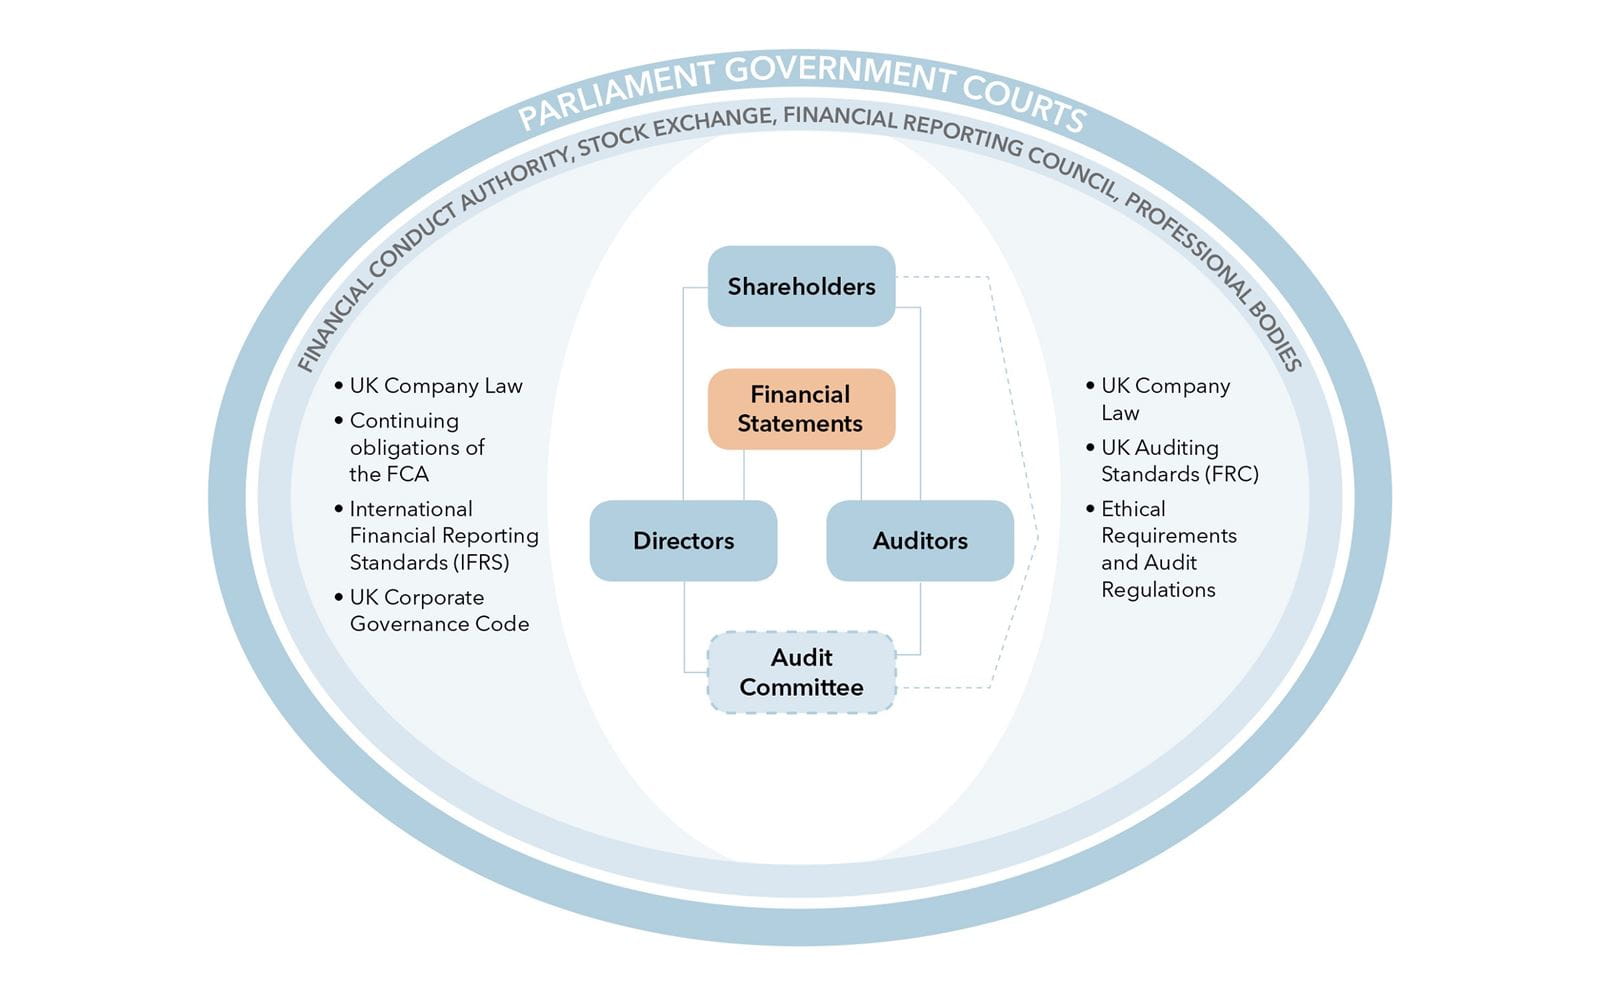 Interactions in the financial reporting system